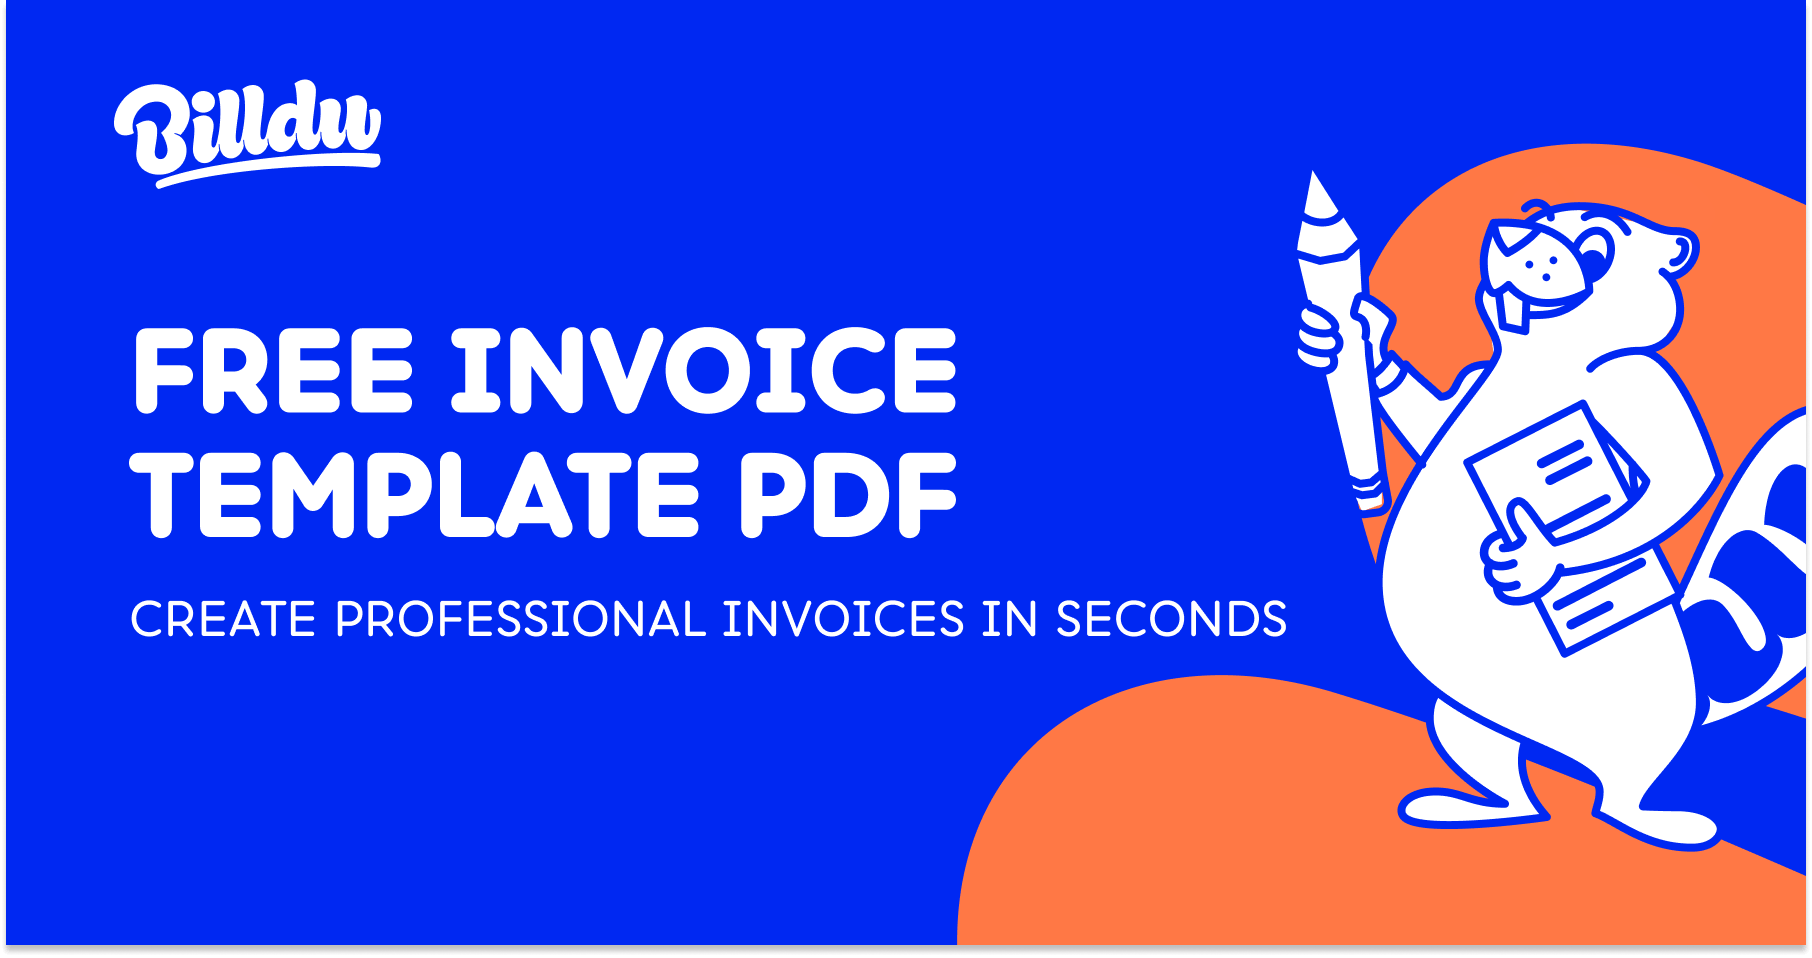 How Can I Get A Free Invoice Template